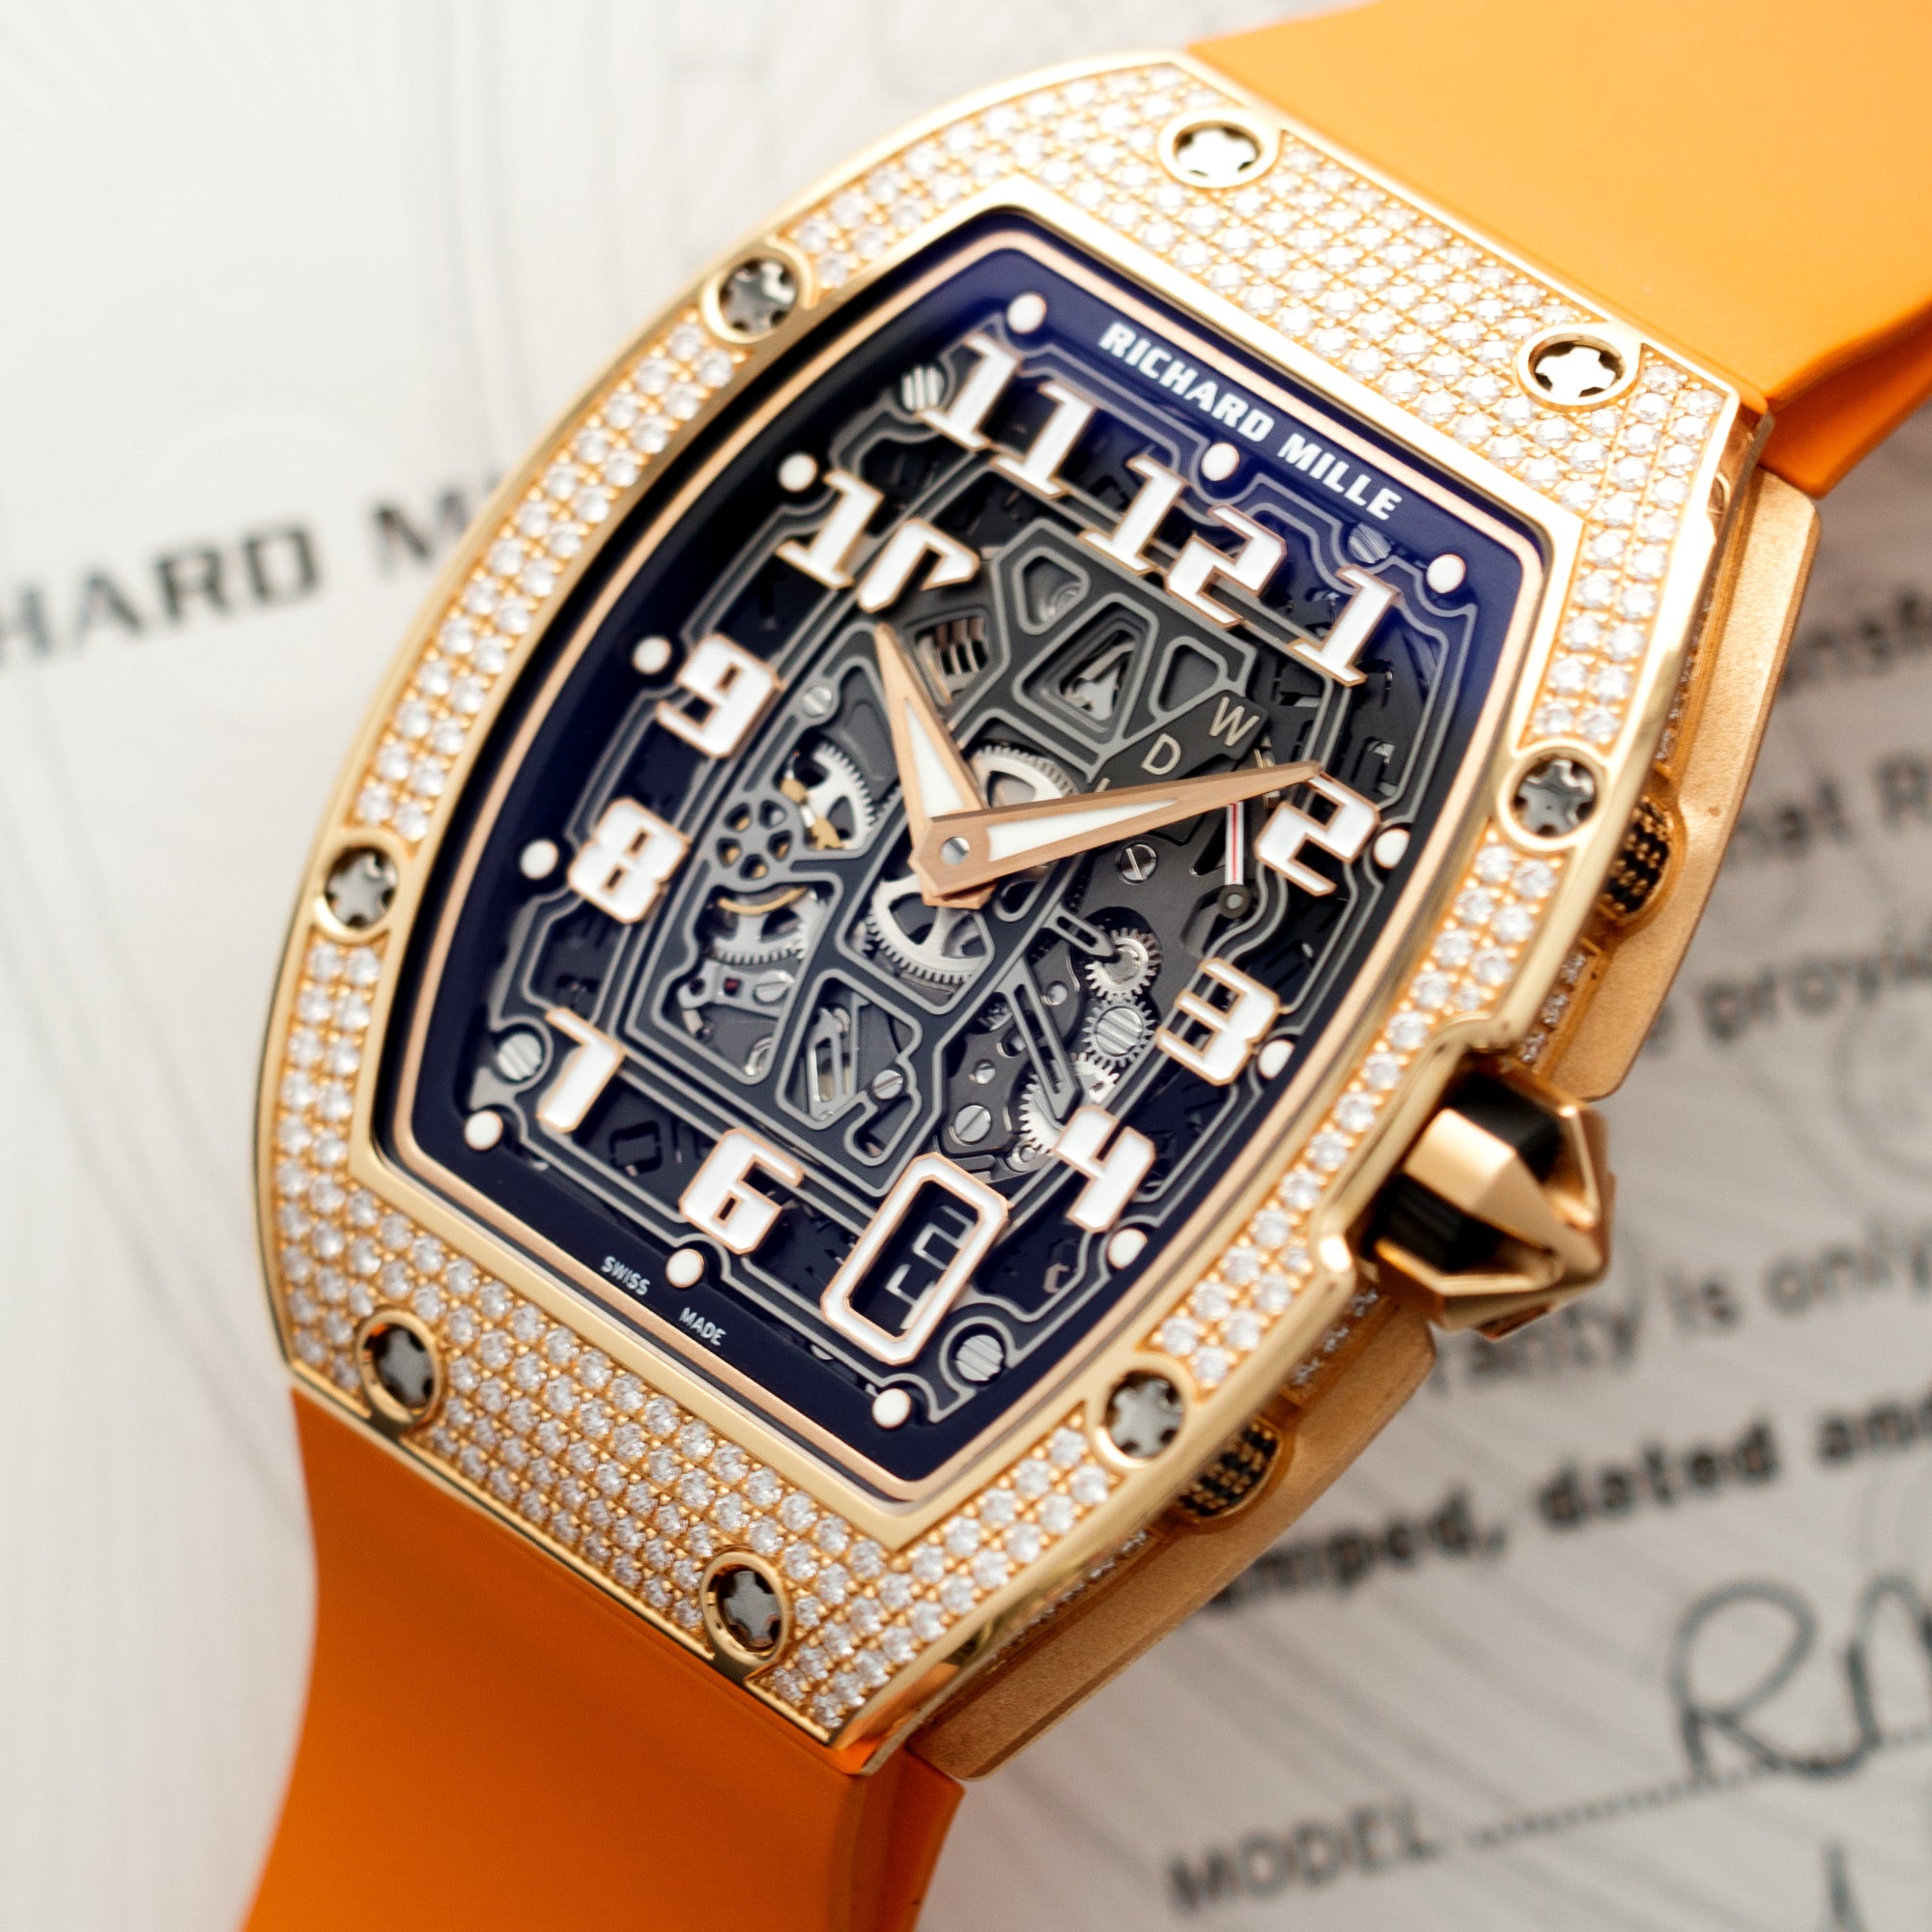 Richard Mille - Richard Mille Rose Gold RM67-01 with Factory Pave Diamond Case - The Keystone Watches